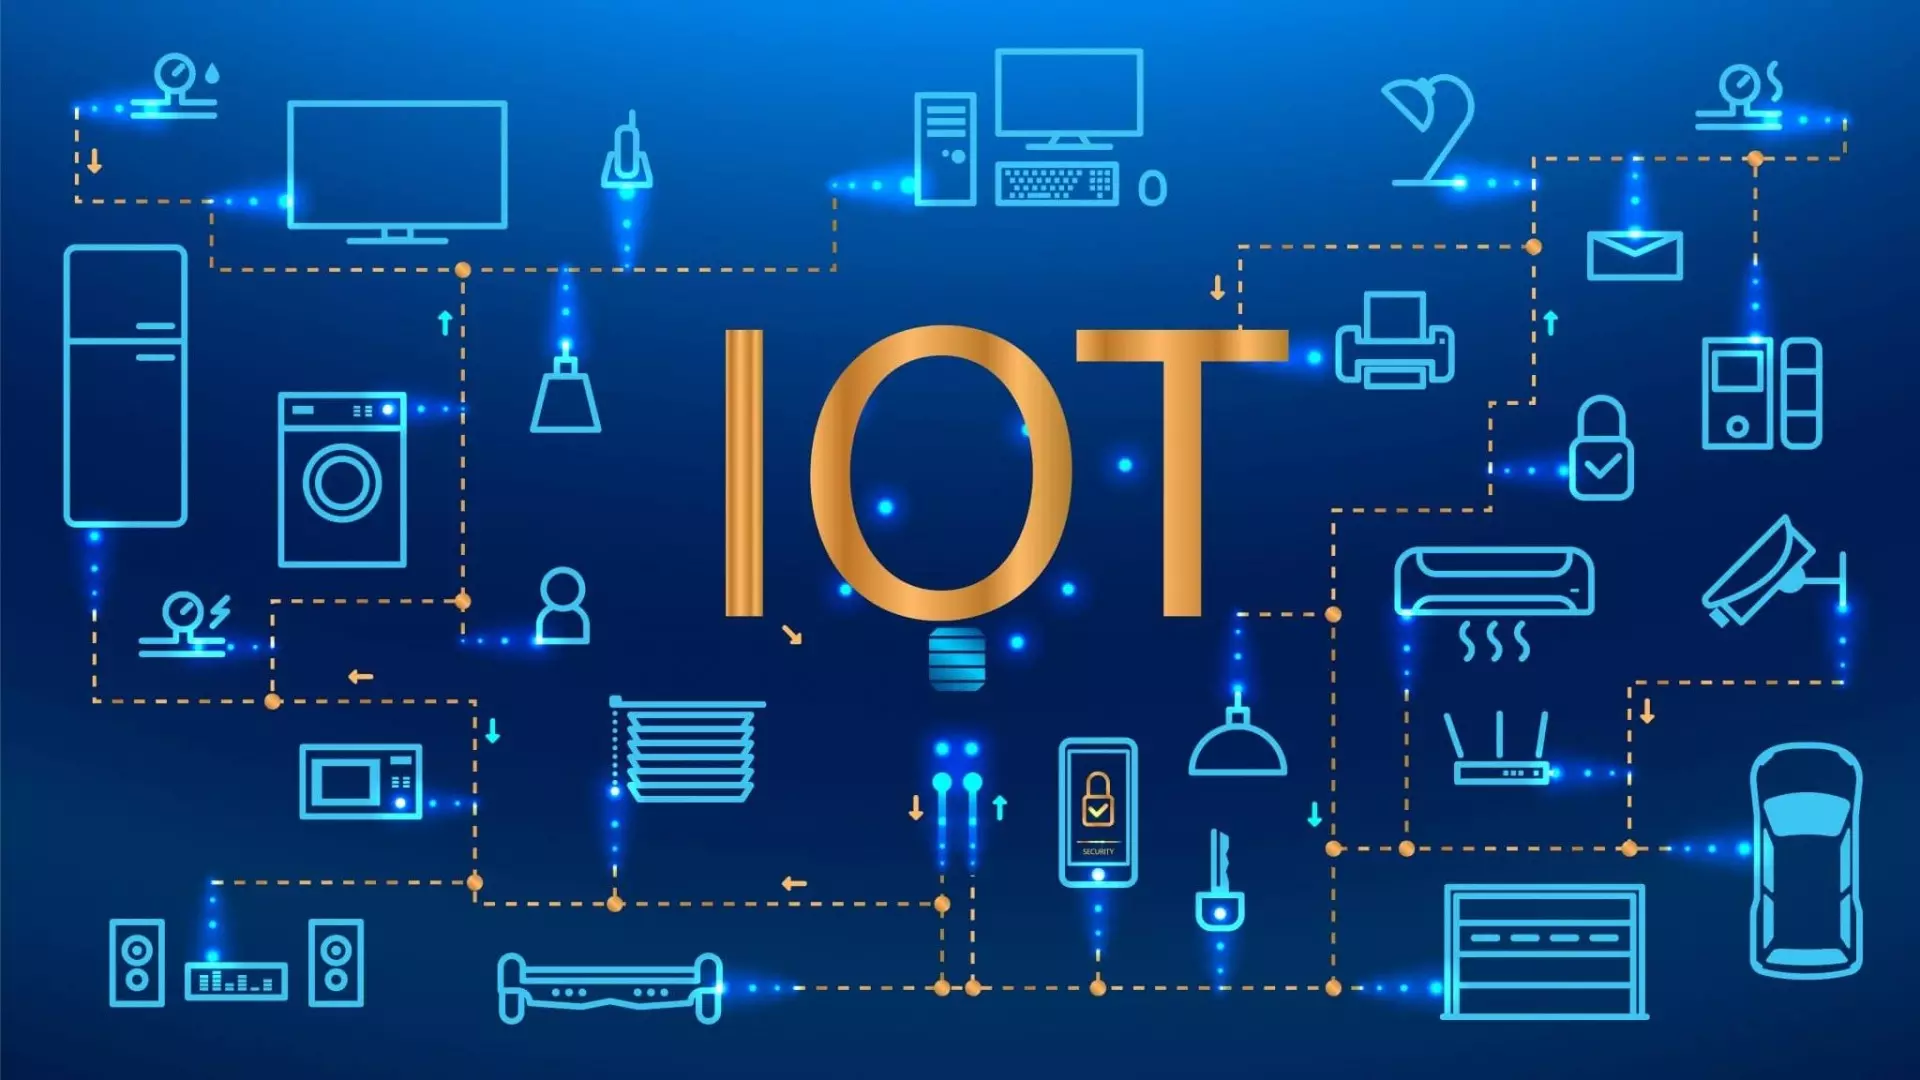 3 Tools To Ensure End-To-End Security During The Implementation Of Your IoT Project